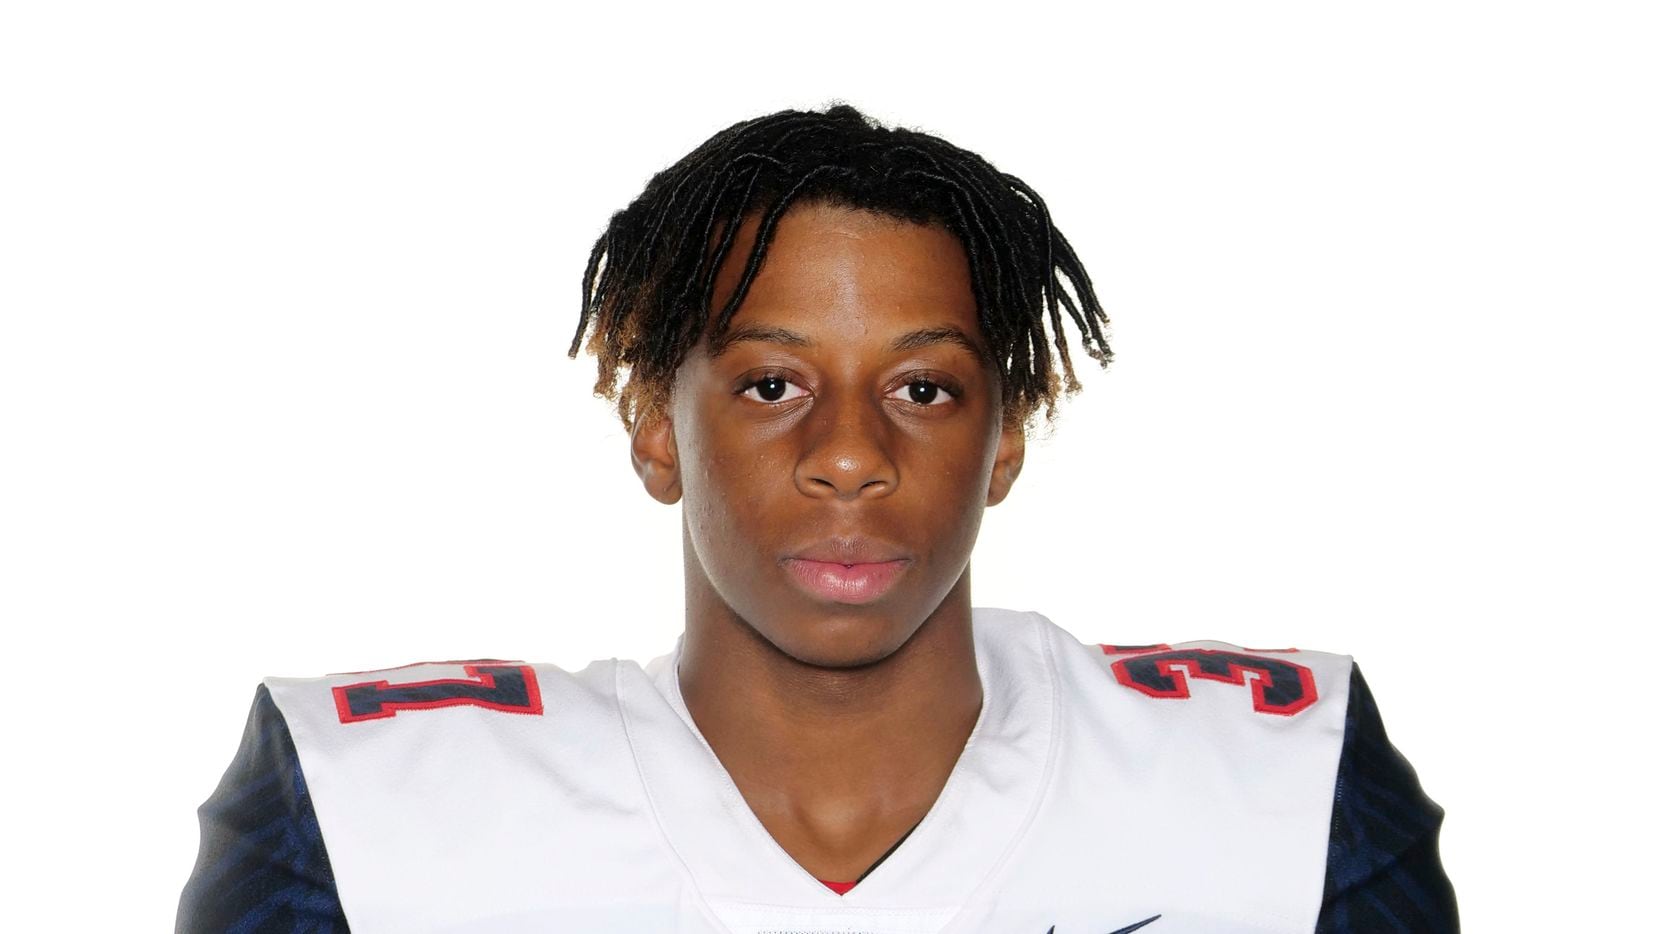 Allen High football player fatally shot at Plano home, police say